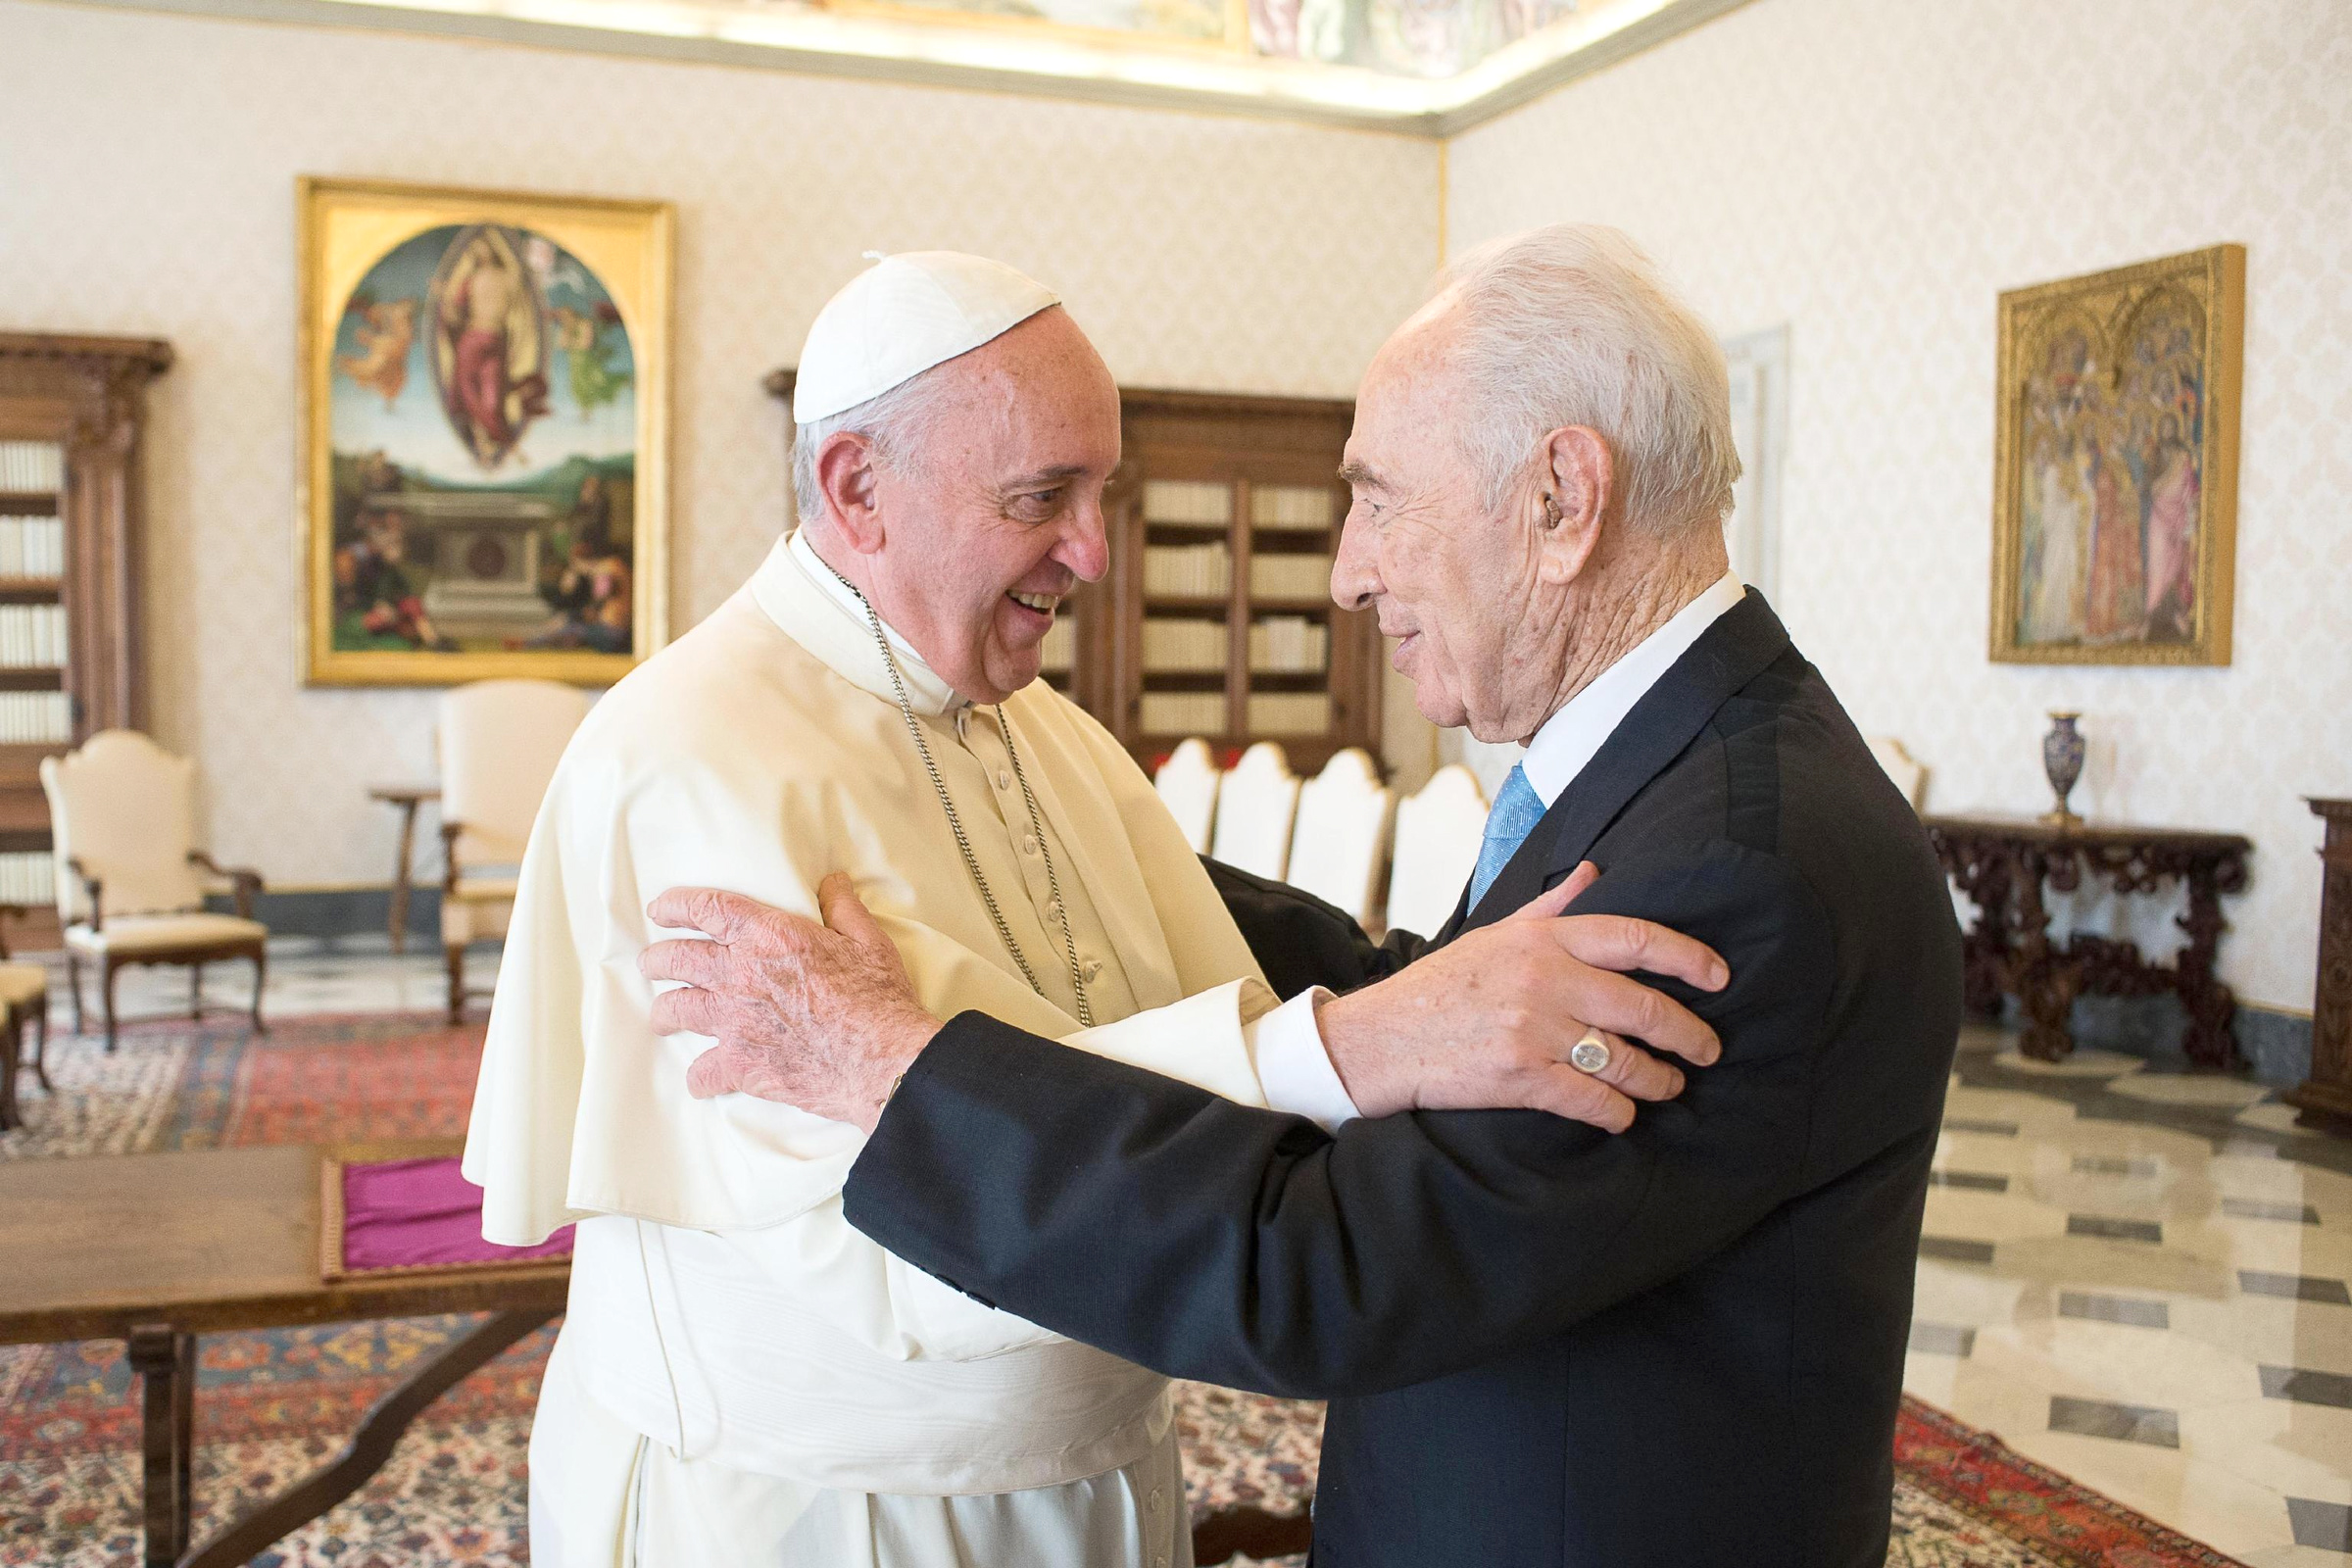 Pope Francis welcomes former Israeli President Shimon Peres during their 2014 meeting at the Vatican. Peres, who dedicated himself to the work of achieving peace during the last years of his life, died Sept. 28 at age 93. (CNS photo/ L'Osservatore Romano via EPA)